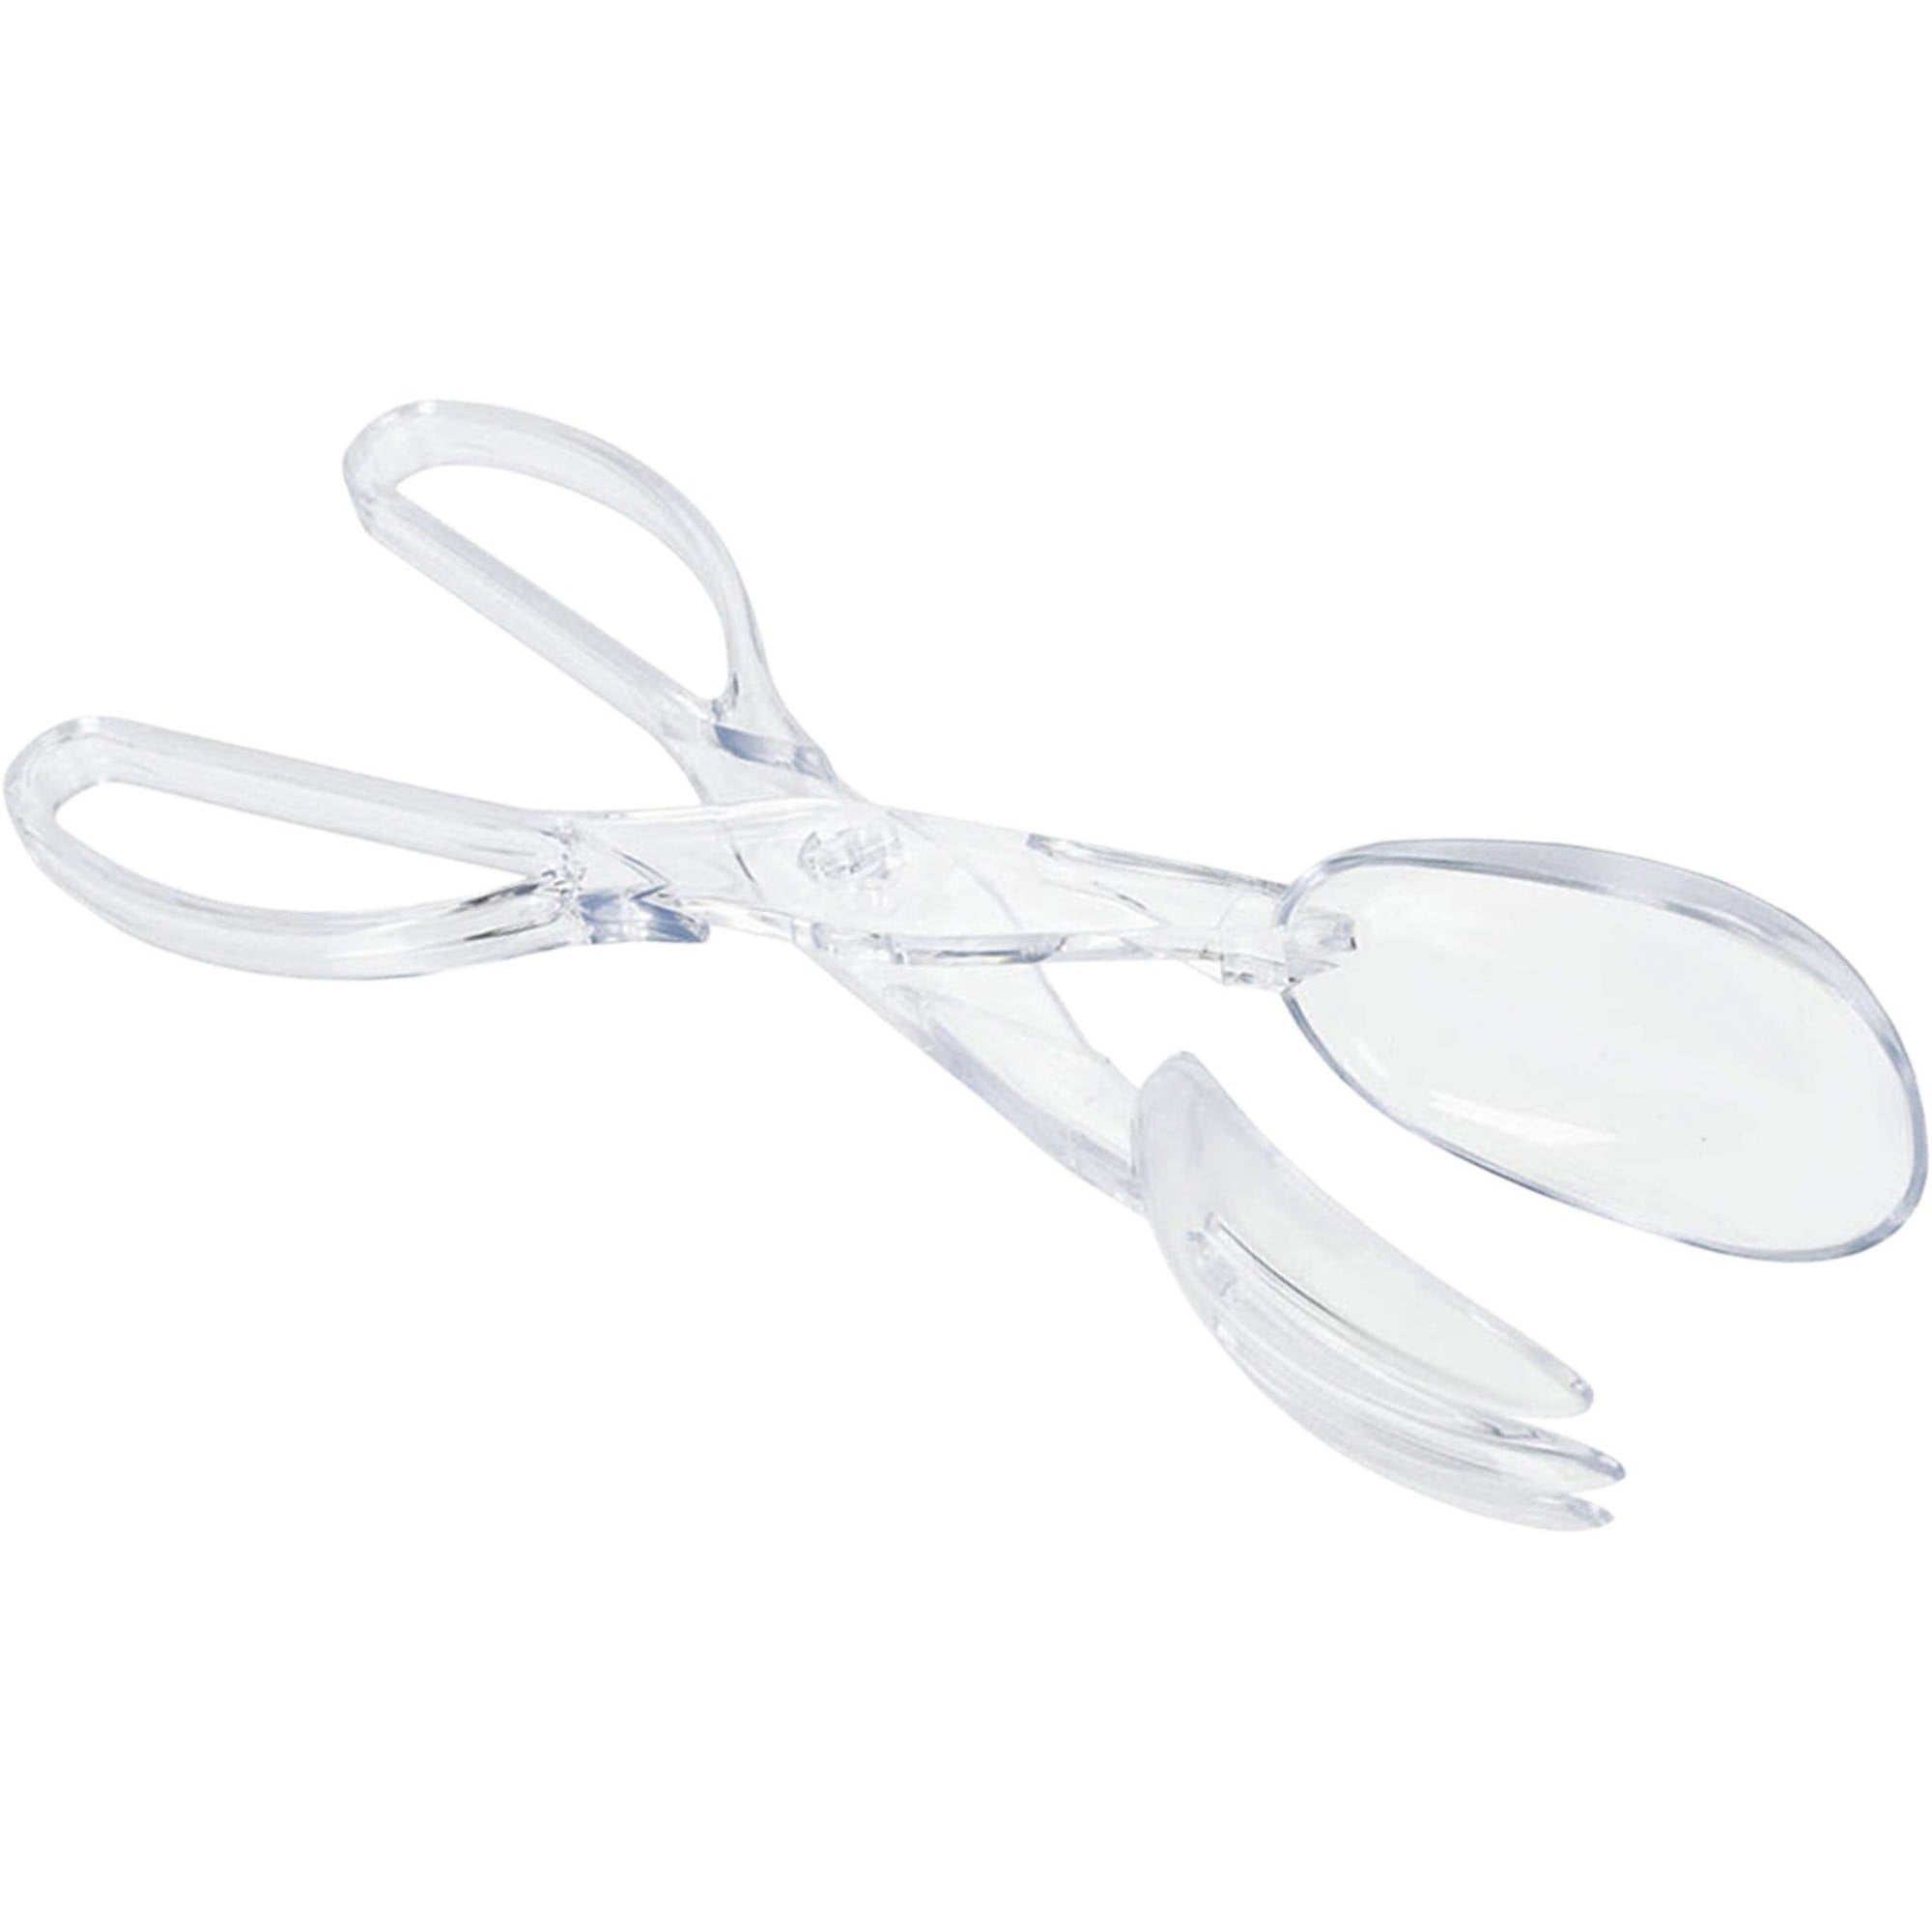 Clear Small Serving Tongs (2 Count)